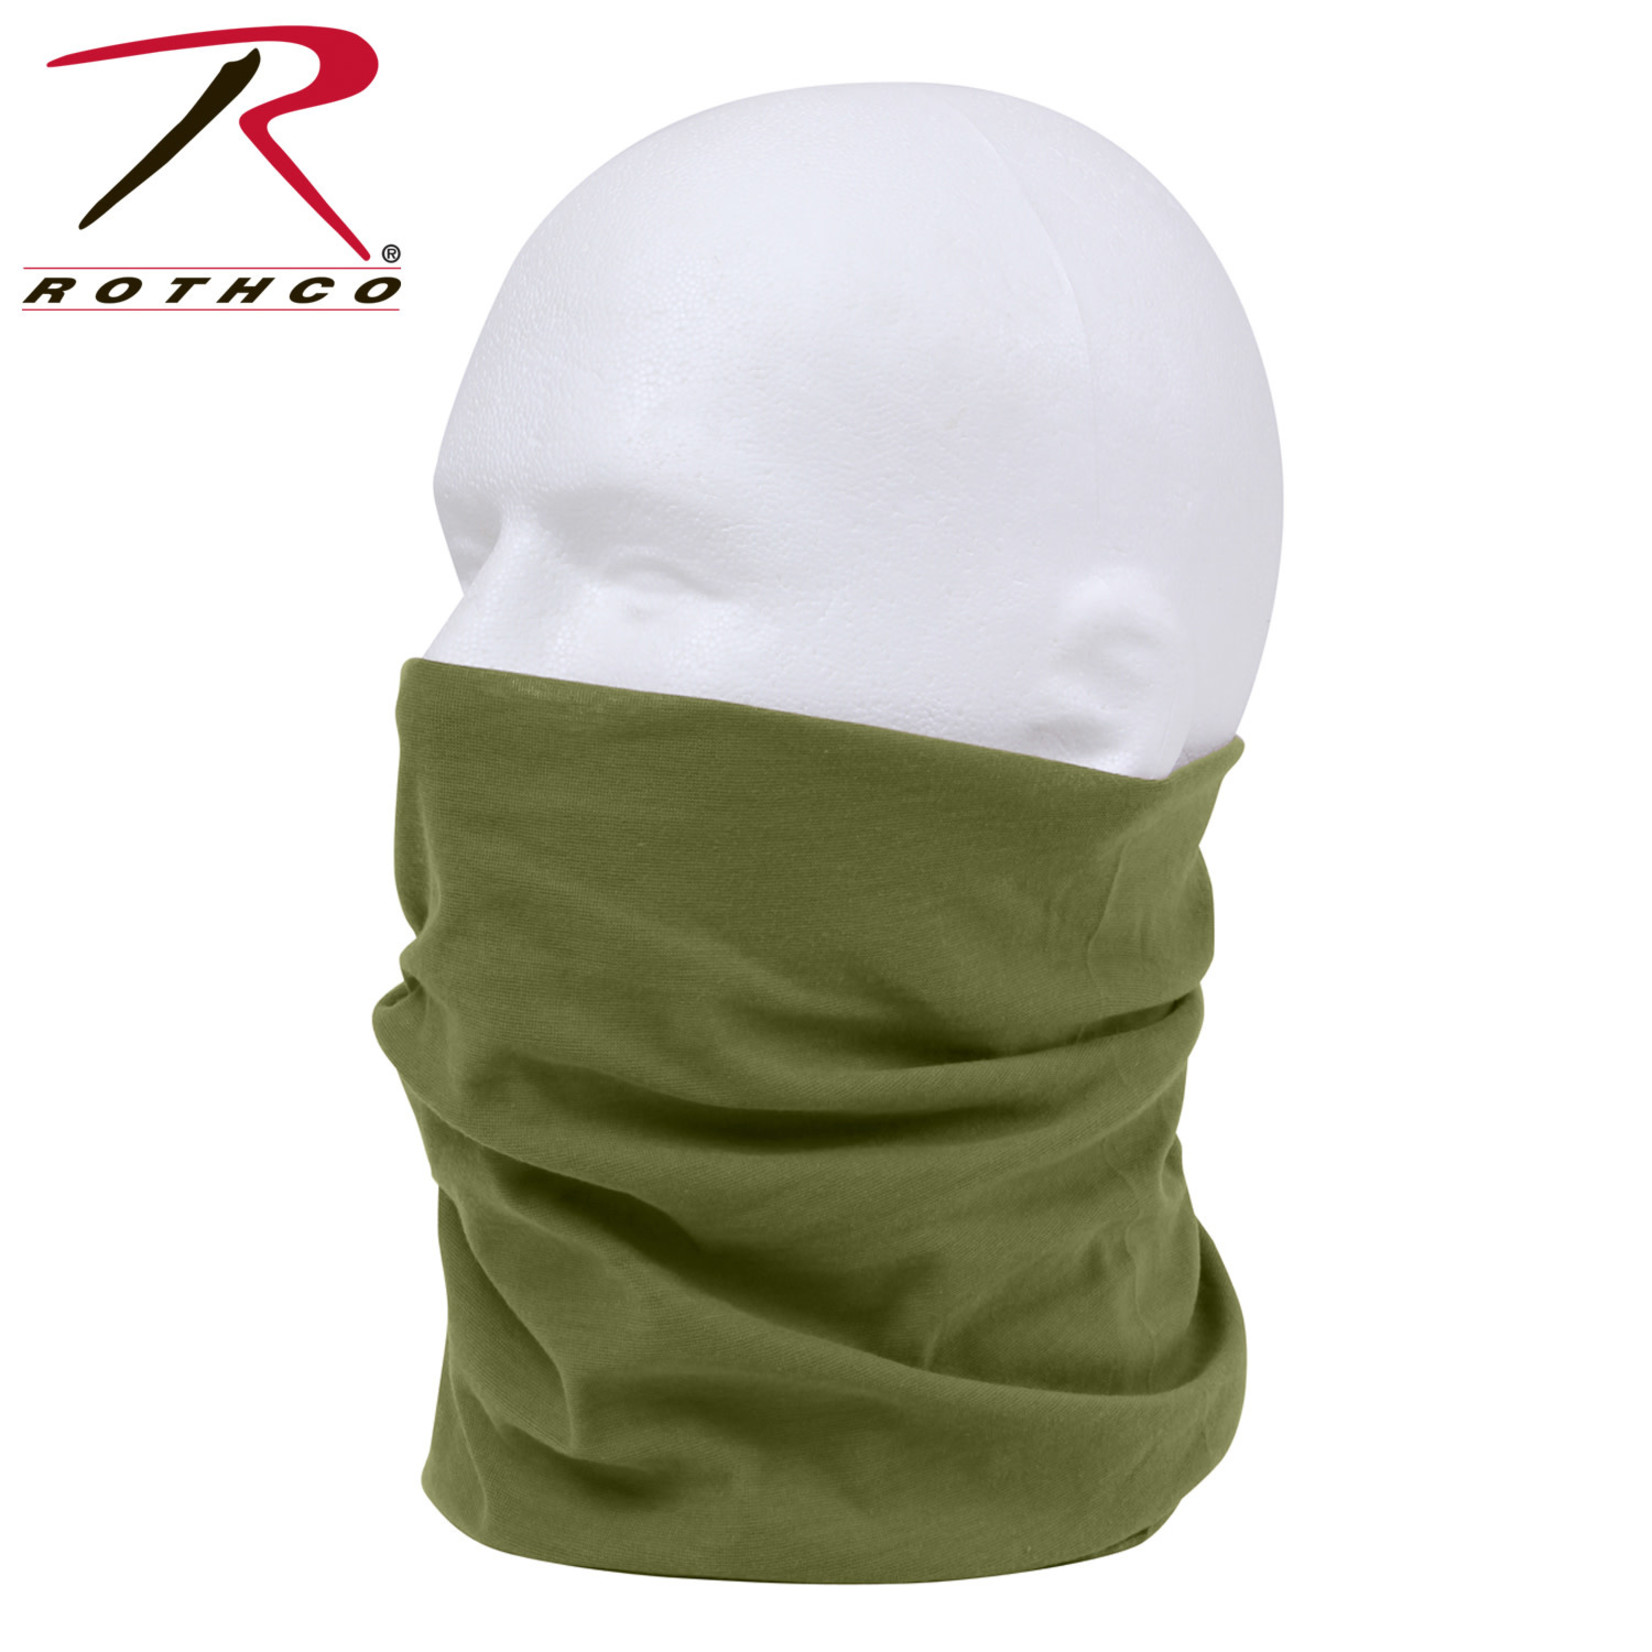 Rothco Rothco Solid Color Neck Gaiter & Tactical Wrap -